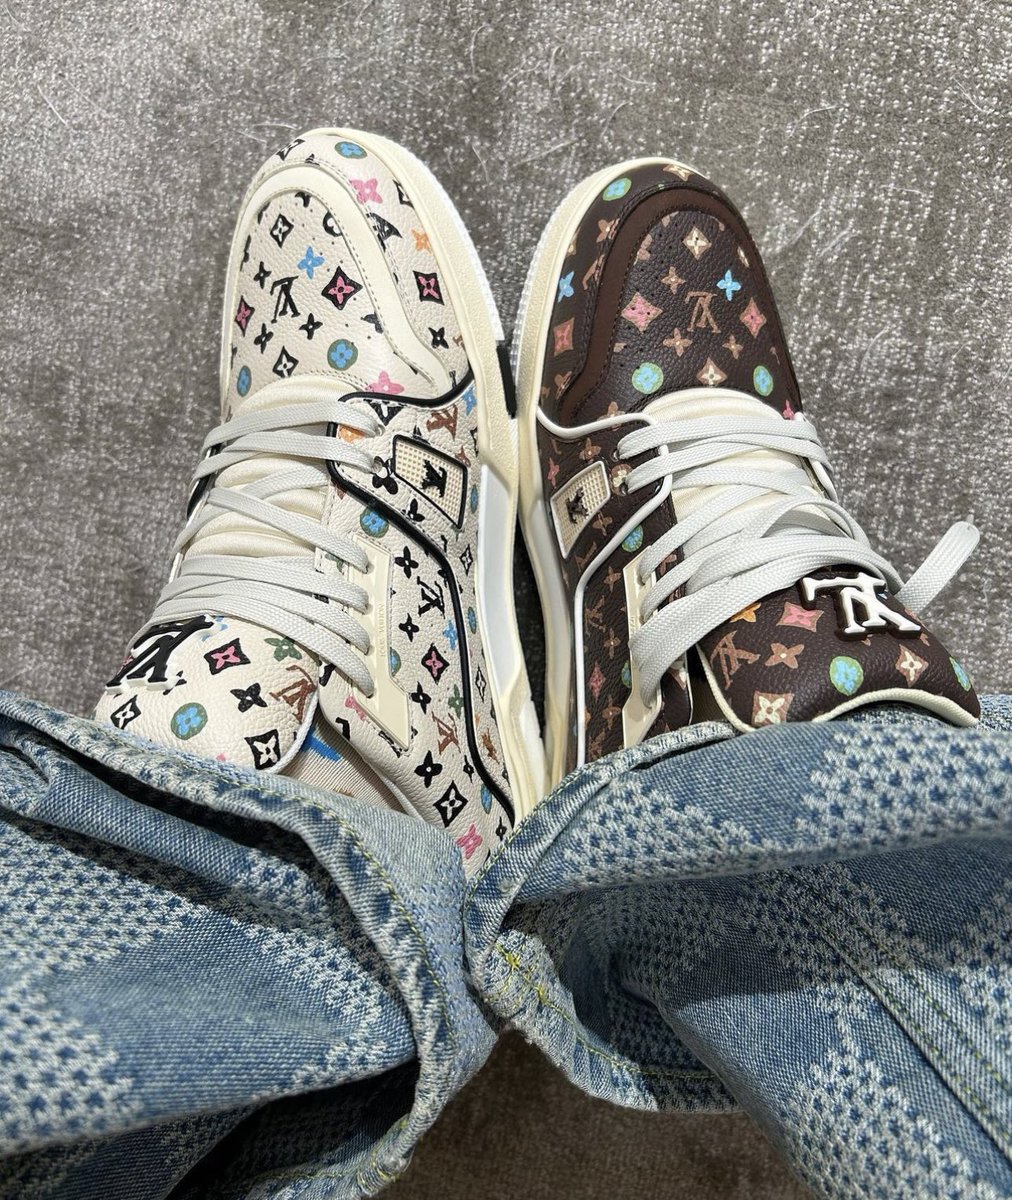 LV Trainers by Tyler The Creator ✍️